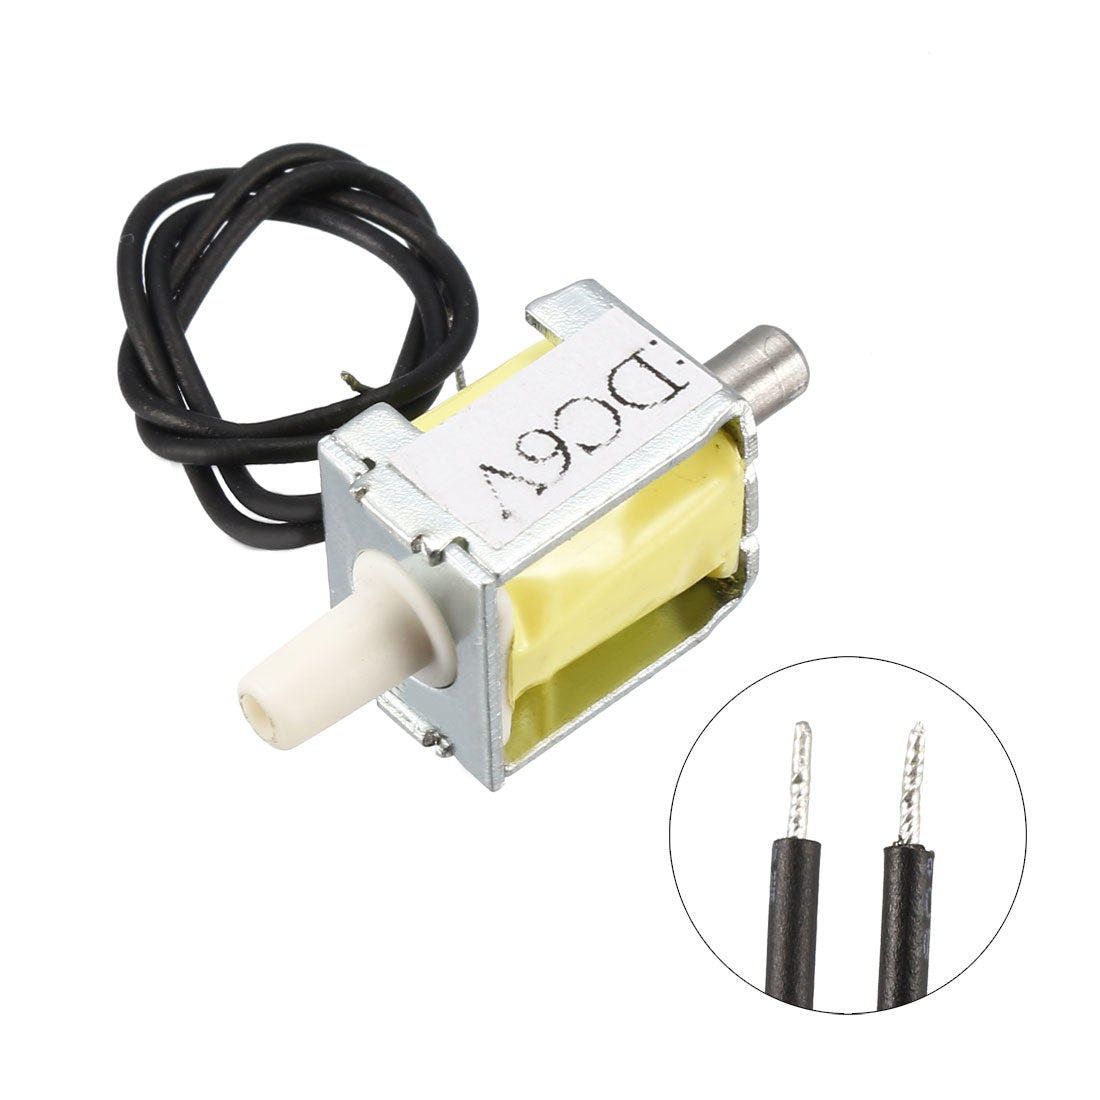 uxcell Uxcell Miniature Solenoid Valve 2 Way Normally Closed DC6V 0.32A Air Solenoid Valve